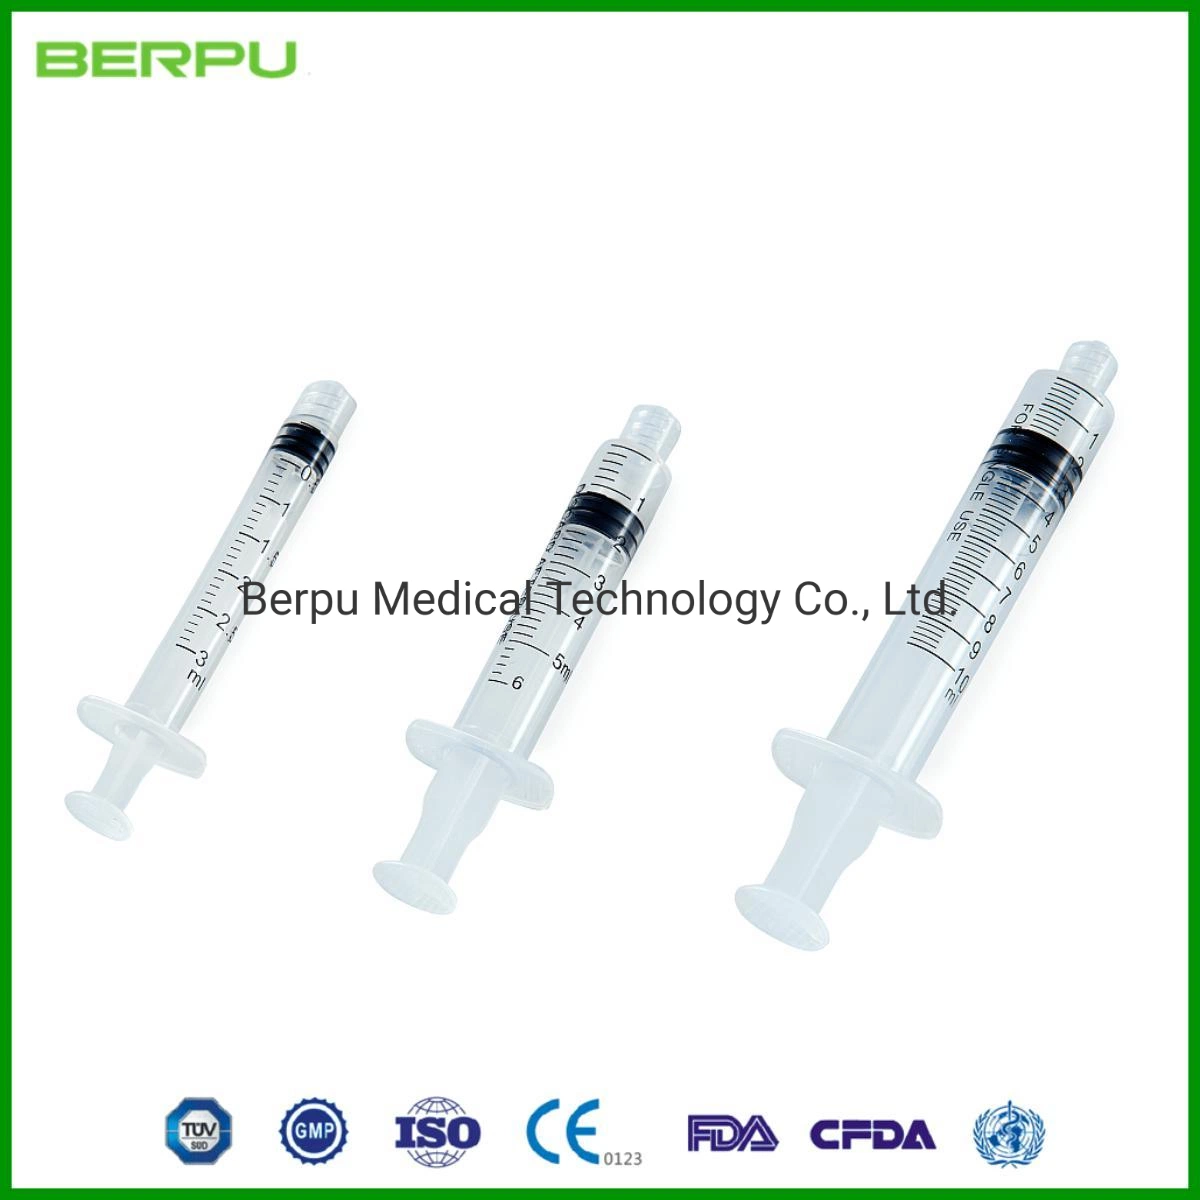 Berpu Eo Sterile Disposable Three Part Luer Lock Luer Slip Central Type Eccentric Type Hypodermic Syringe Injection Syringe with Size 1-60ml CE ISO FDA